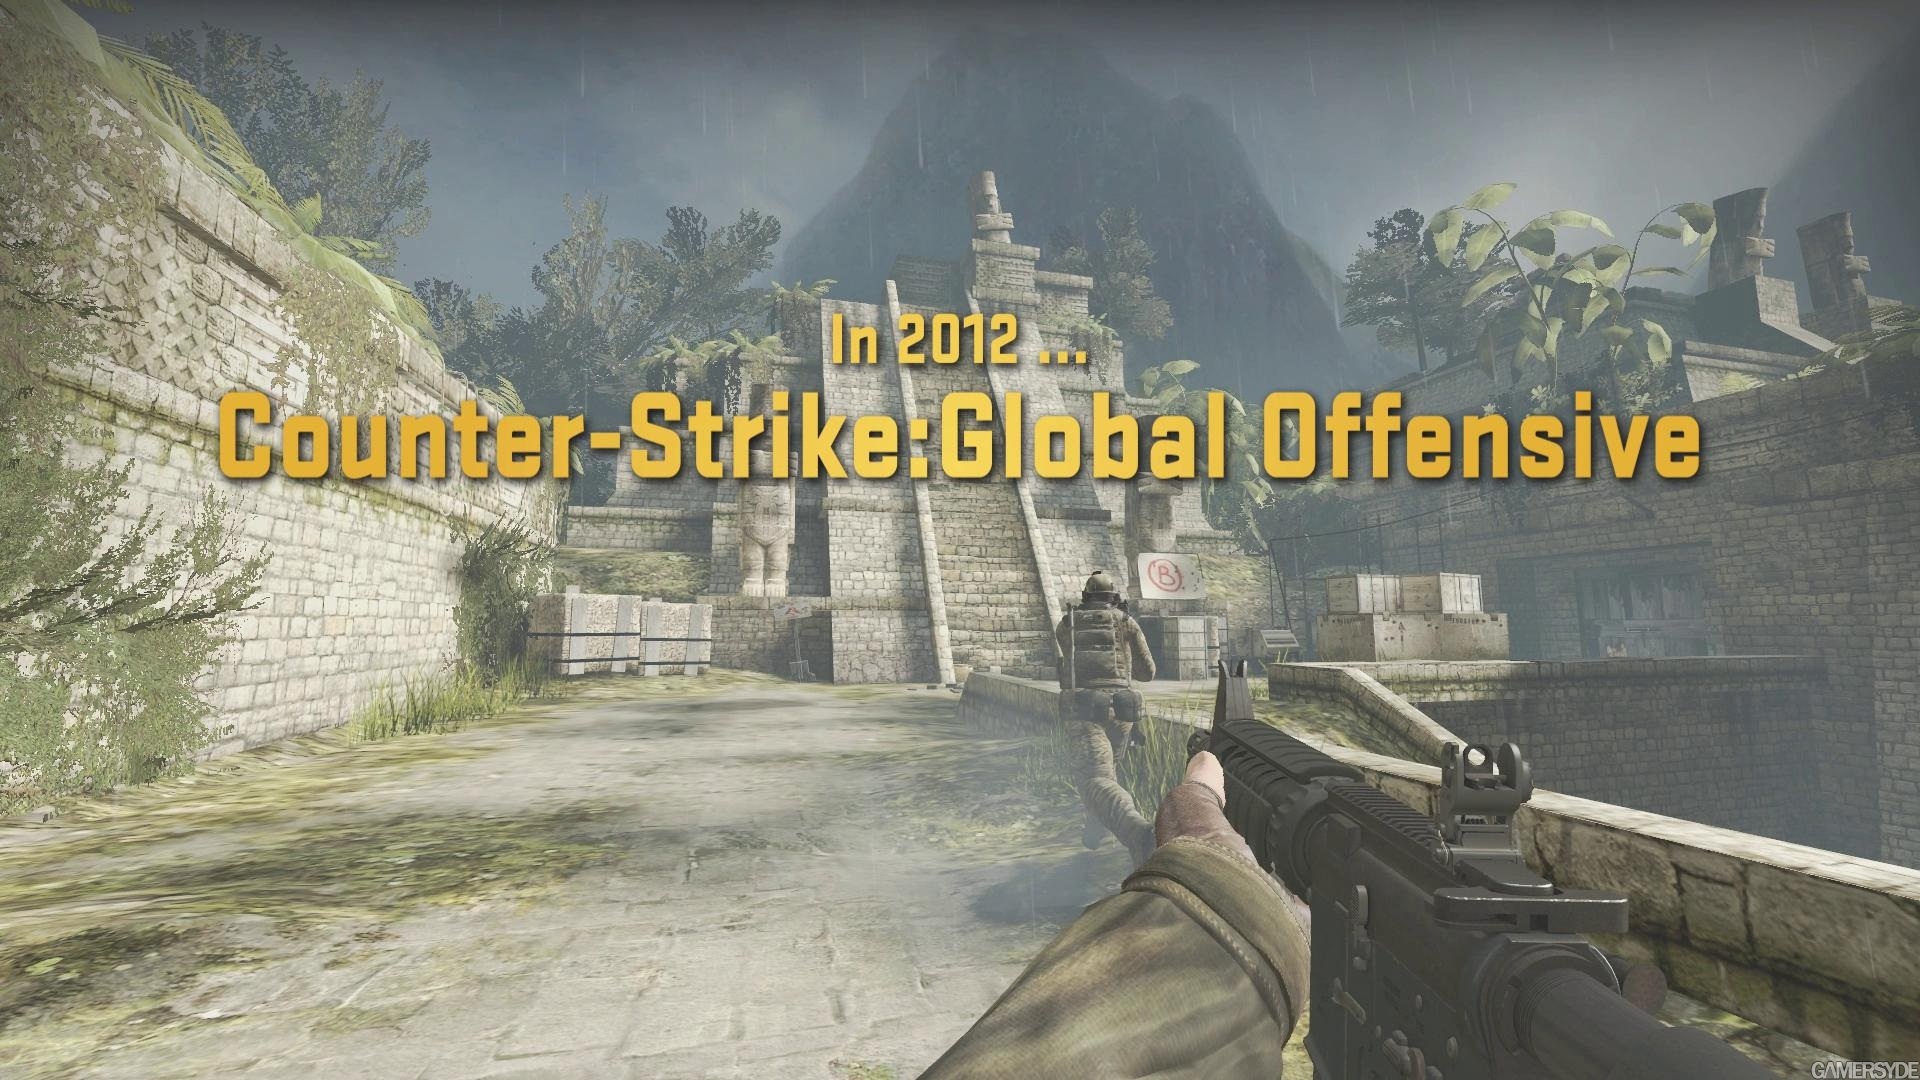 Counter-Strike: Global Offensive - Trailer - High quality stream